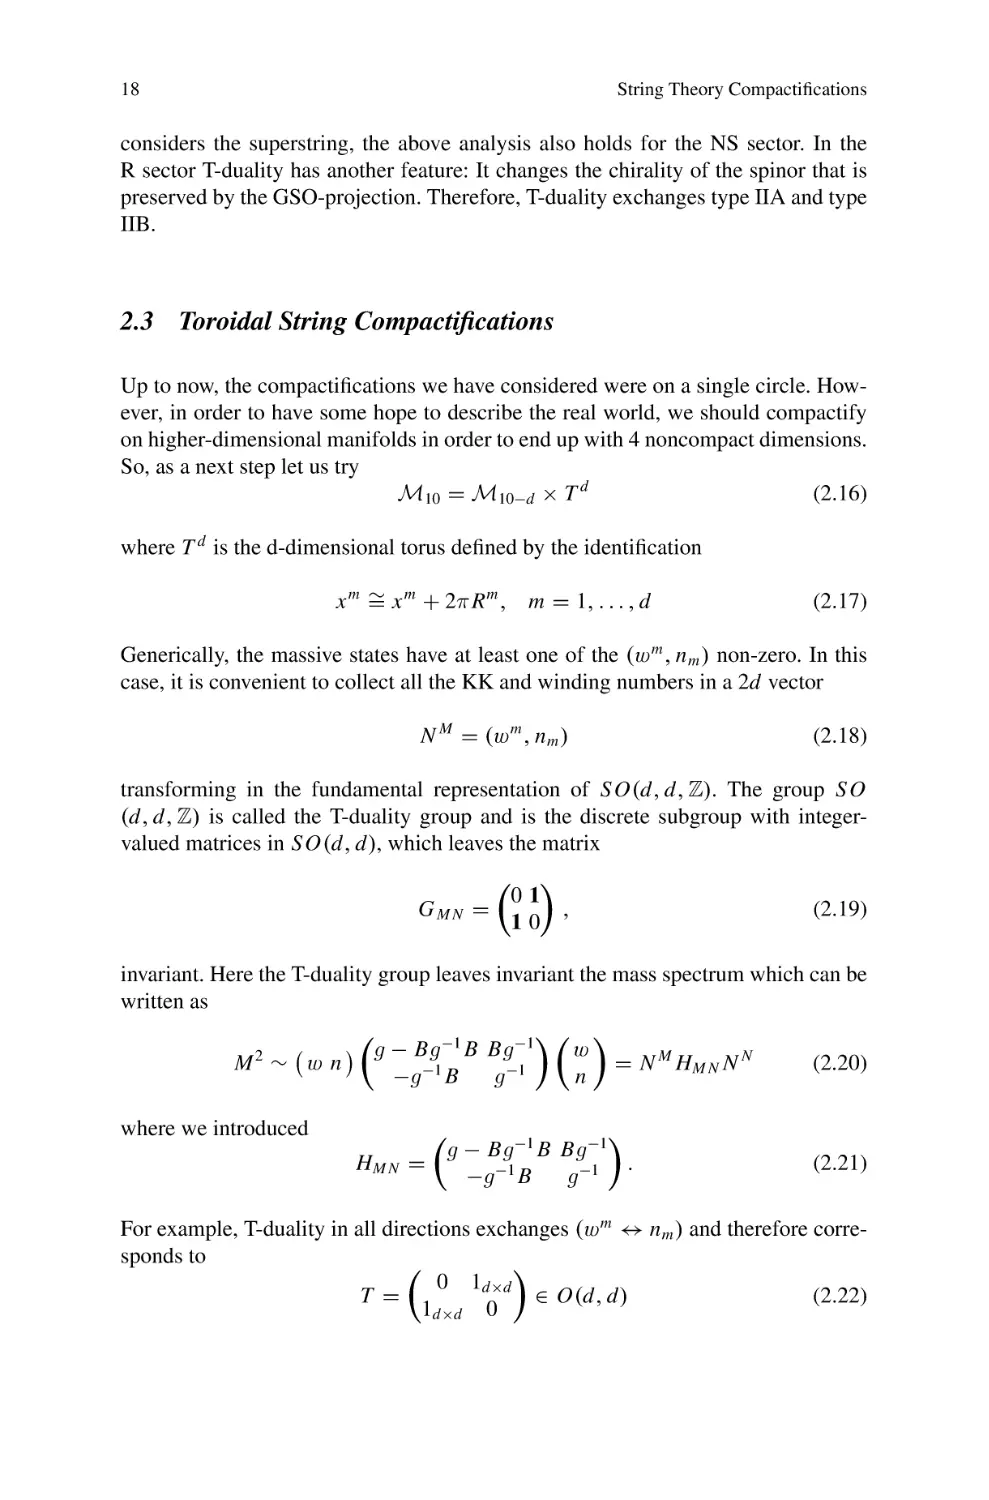 2.3 Toroidal String Compactifications